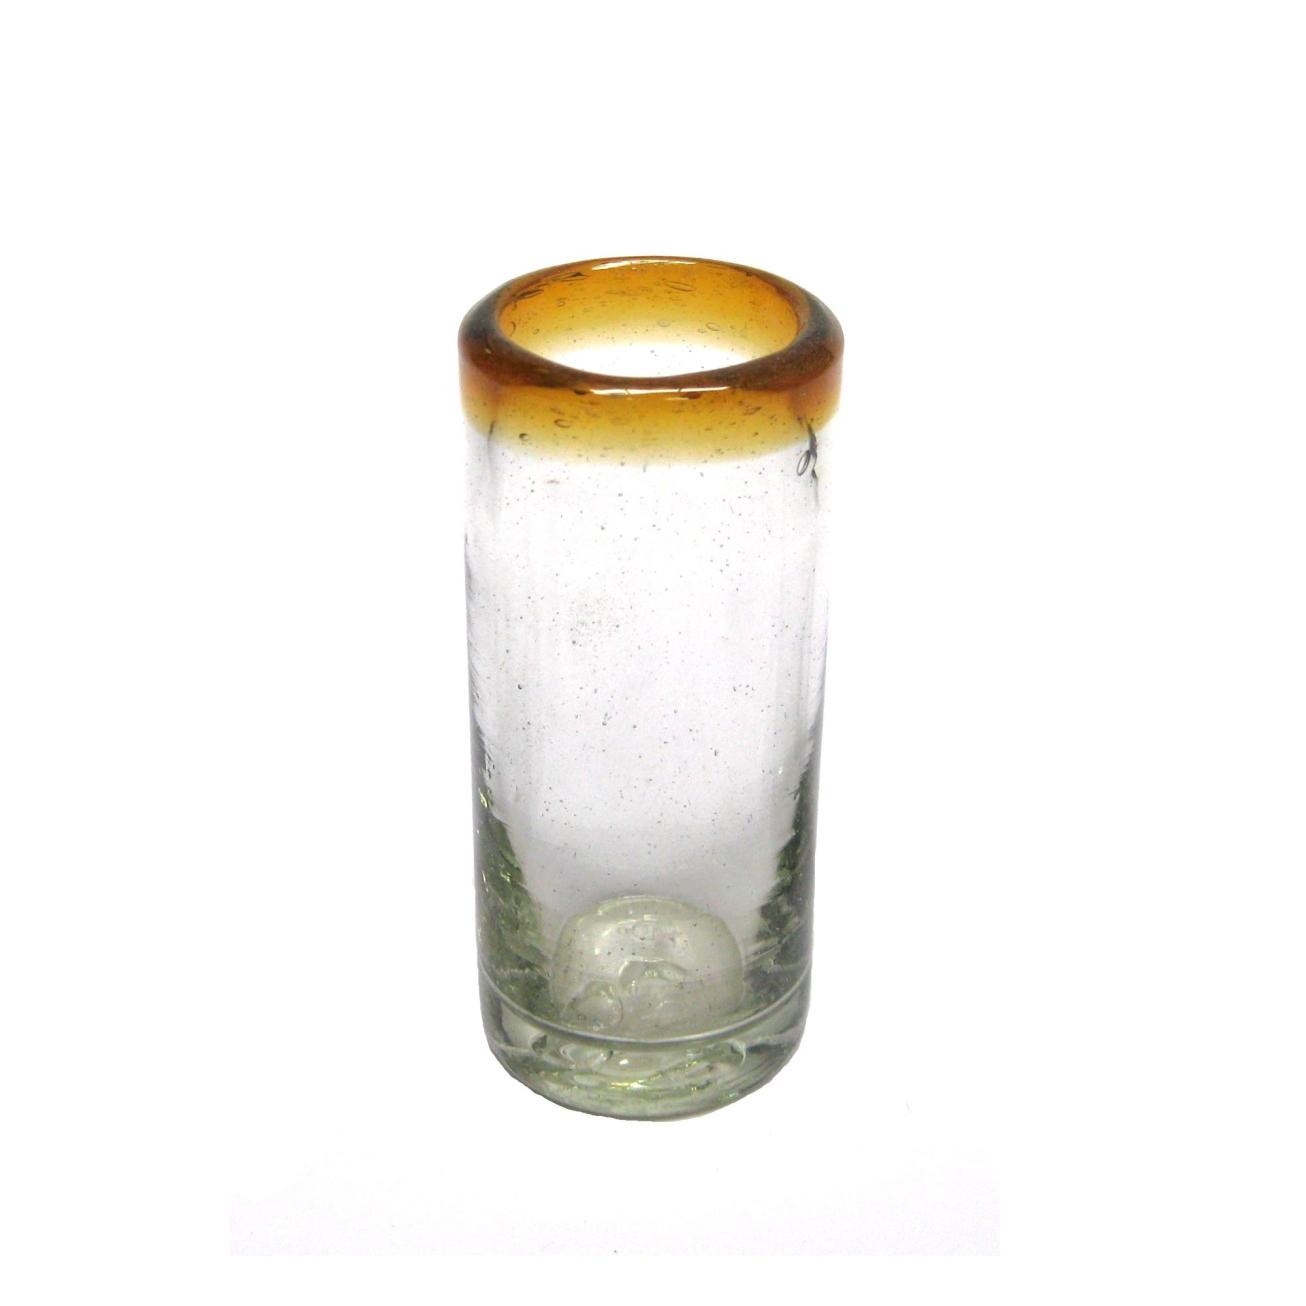 Wholesale MEXICAN GLASSWARE / Amber Rim 2 oz Tequila Shot Glasses  / These shot glasses bordered in amber color are perfect for sipping your favourite tequila or any other liquor.